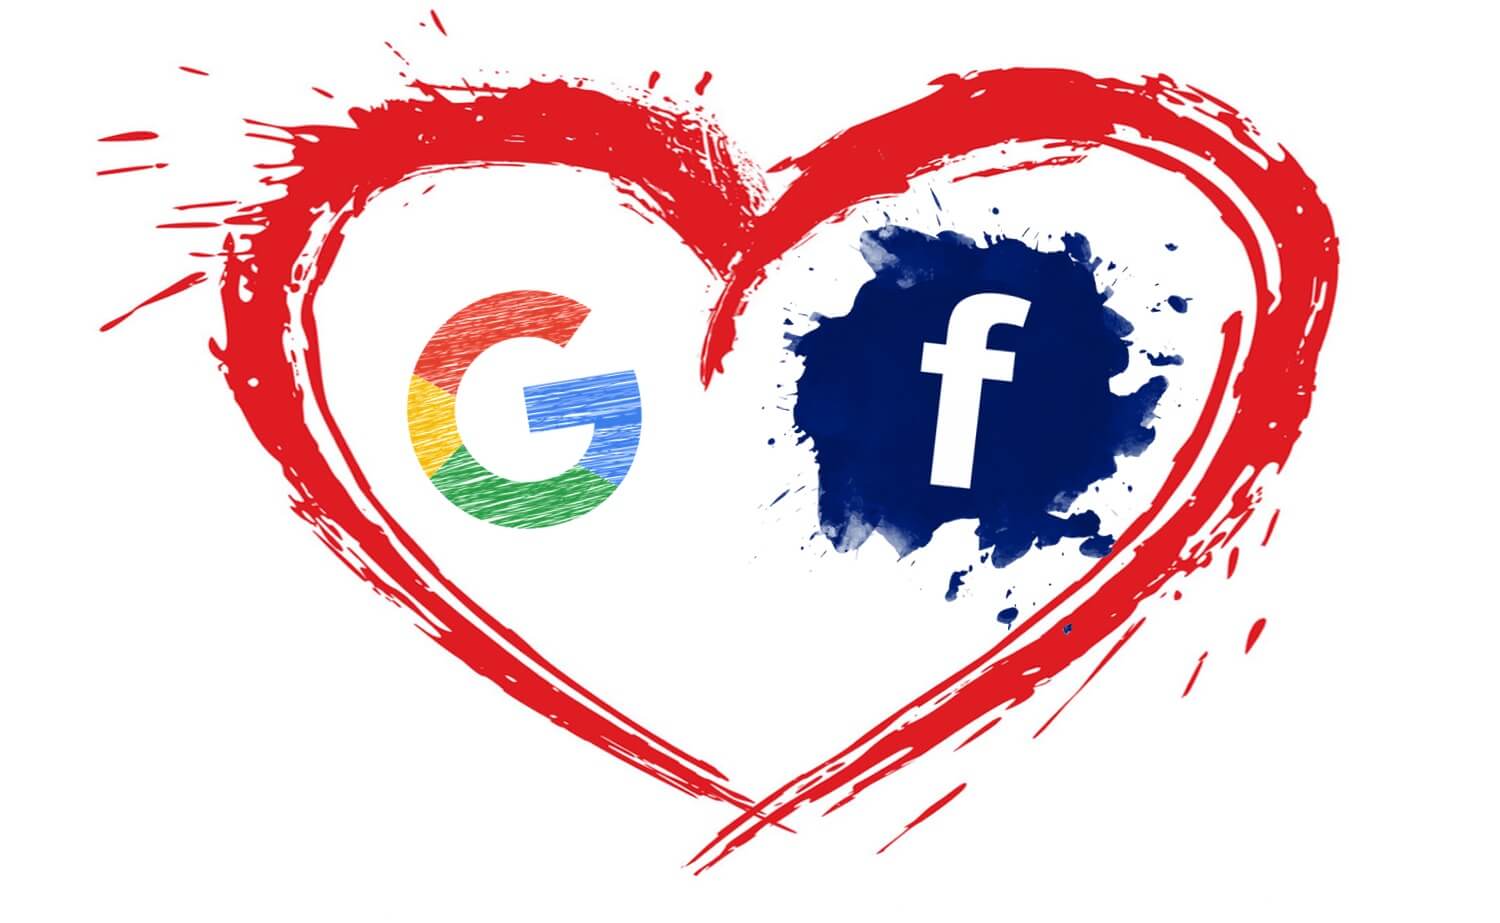 Google logo and Facebook logo in a red heart